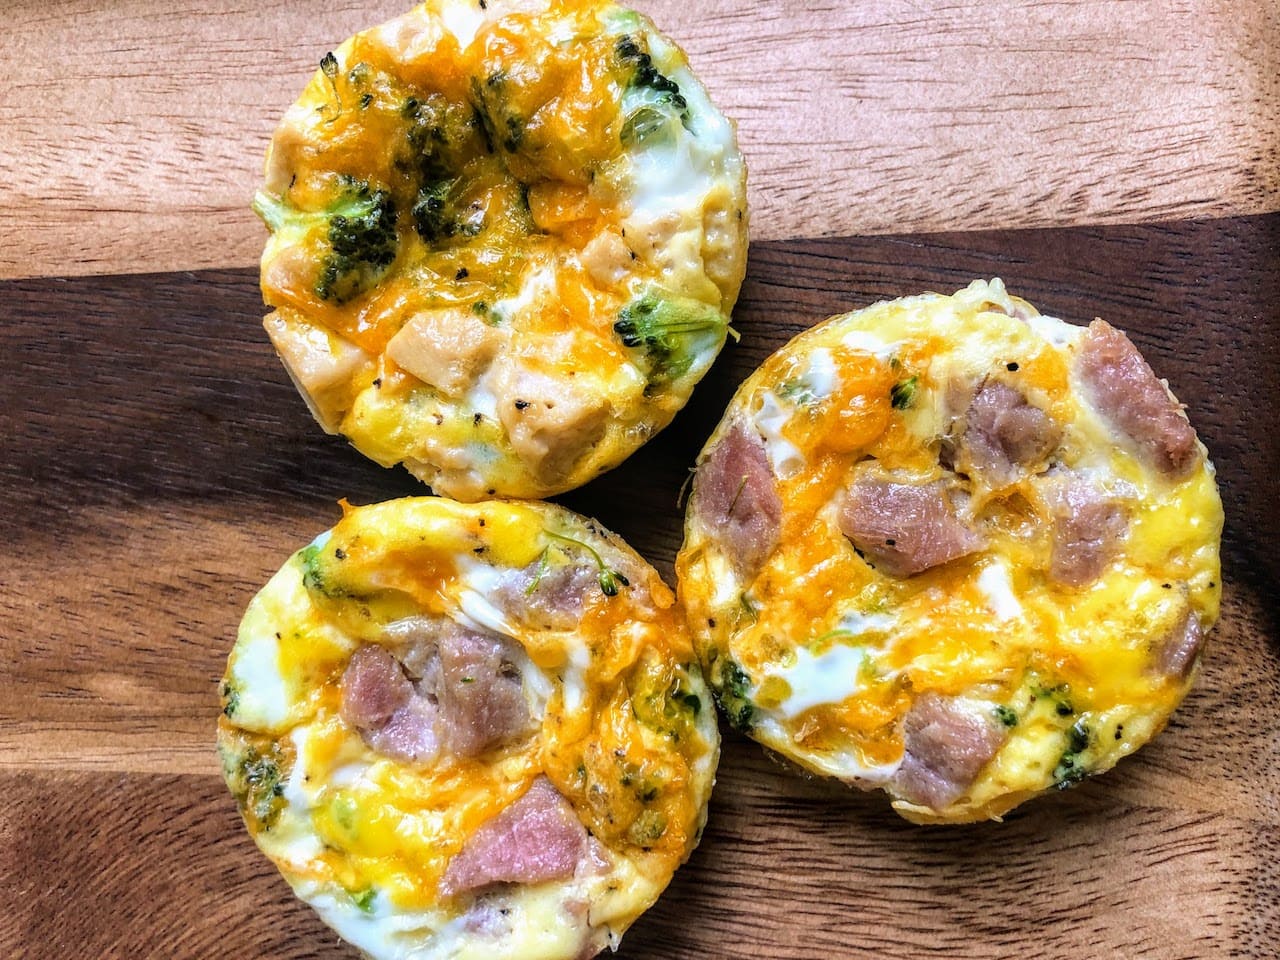 three mini egg bites baked with ham, broccoli and cheese